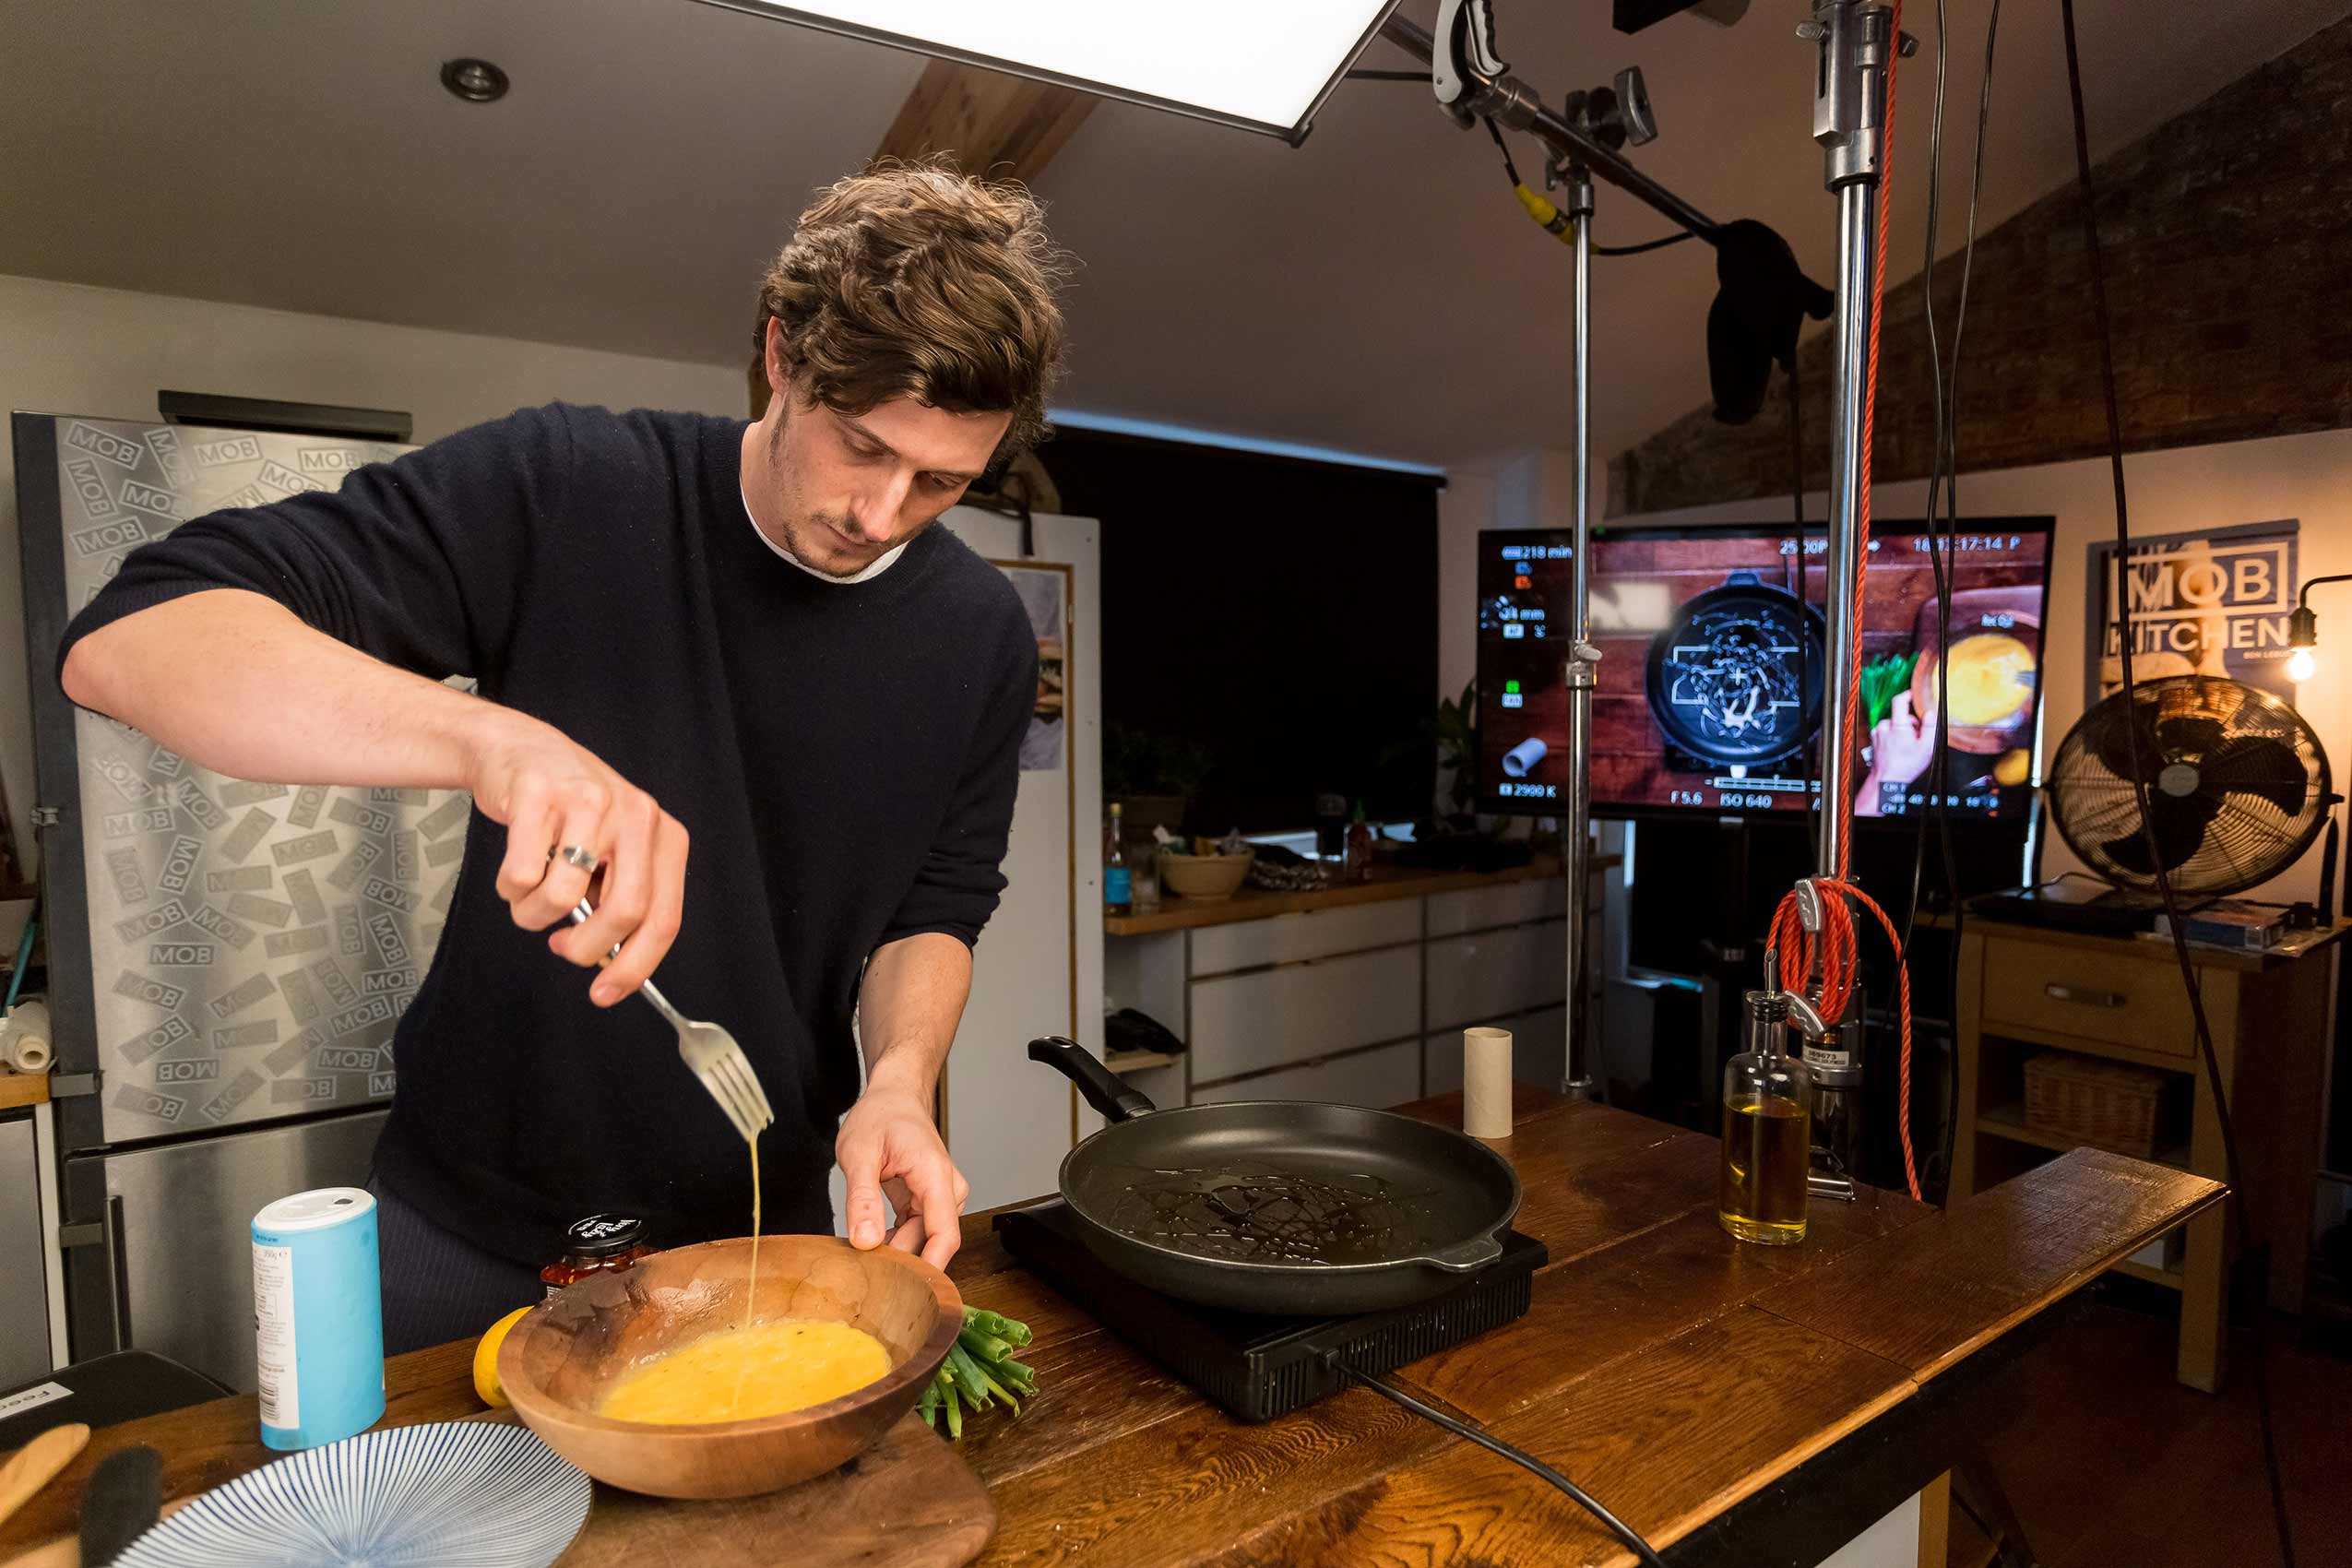 Mob Kitchen founder Ben Lebus scrambling eggs with a fork in a wooden bowl in his office kitchen 